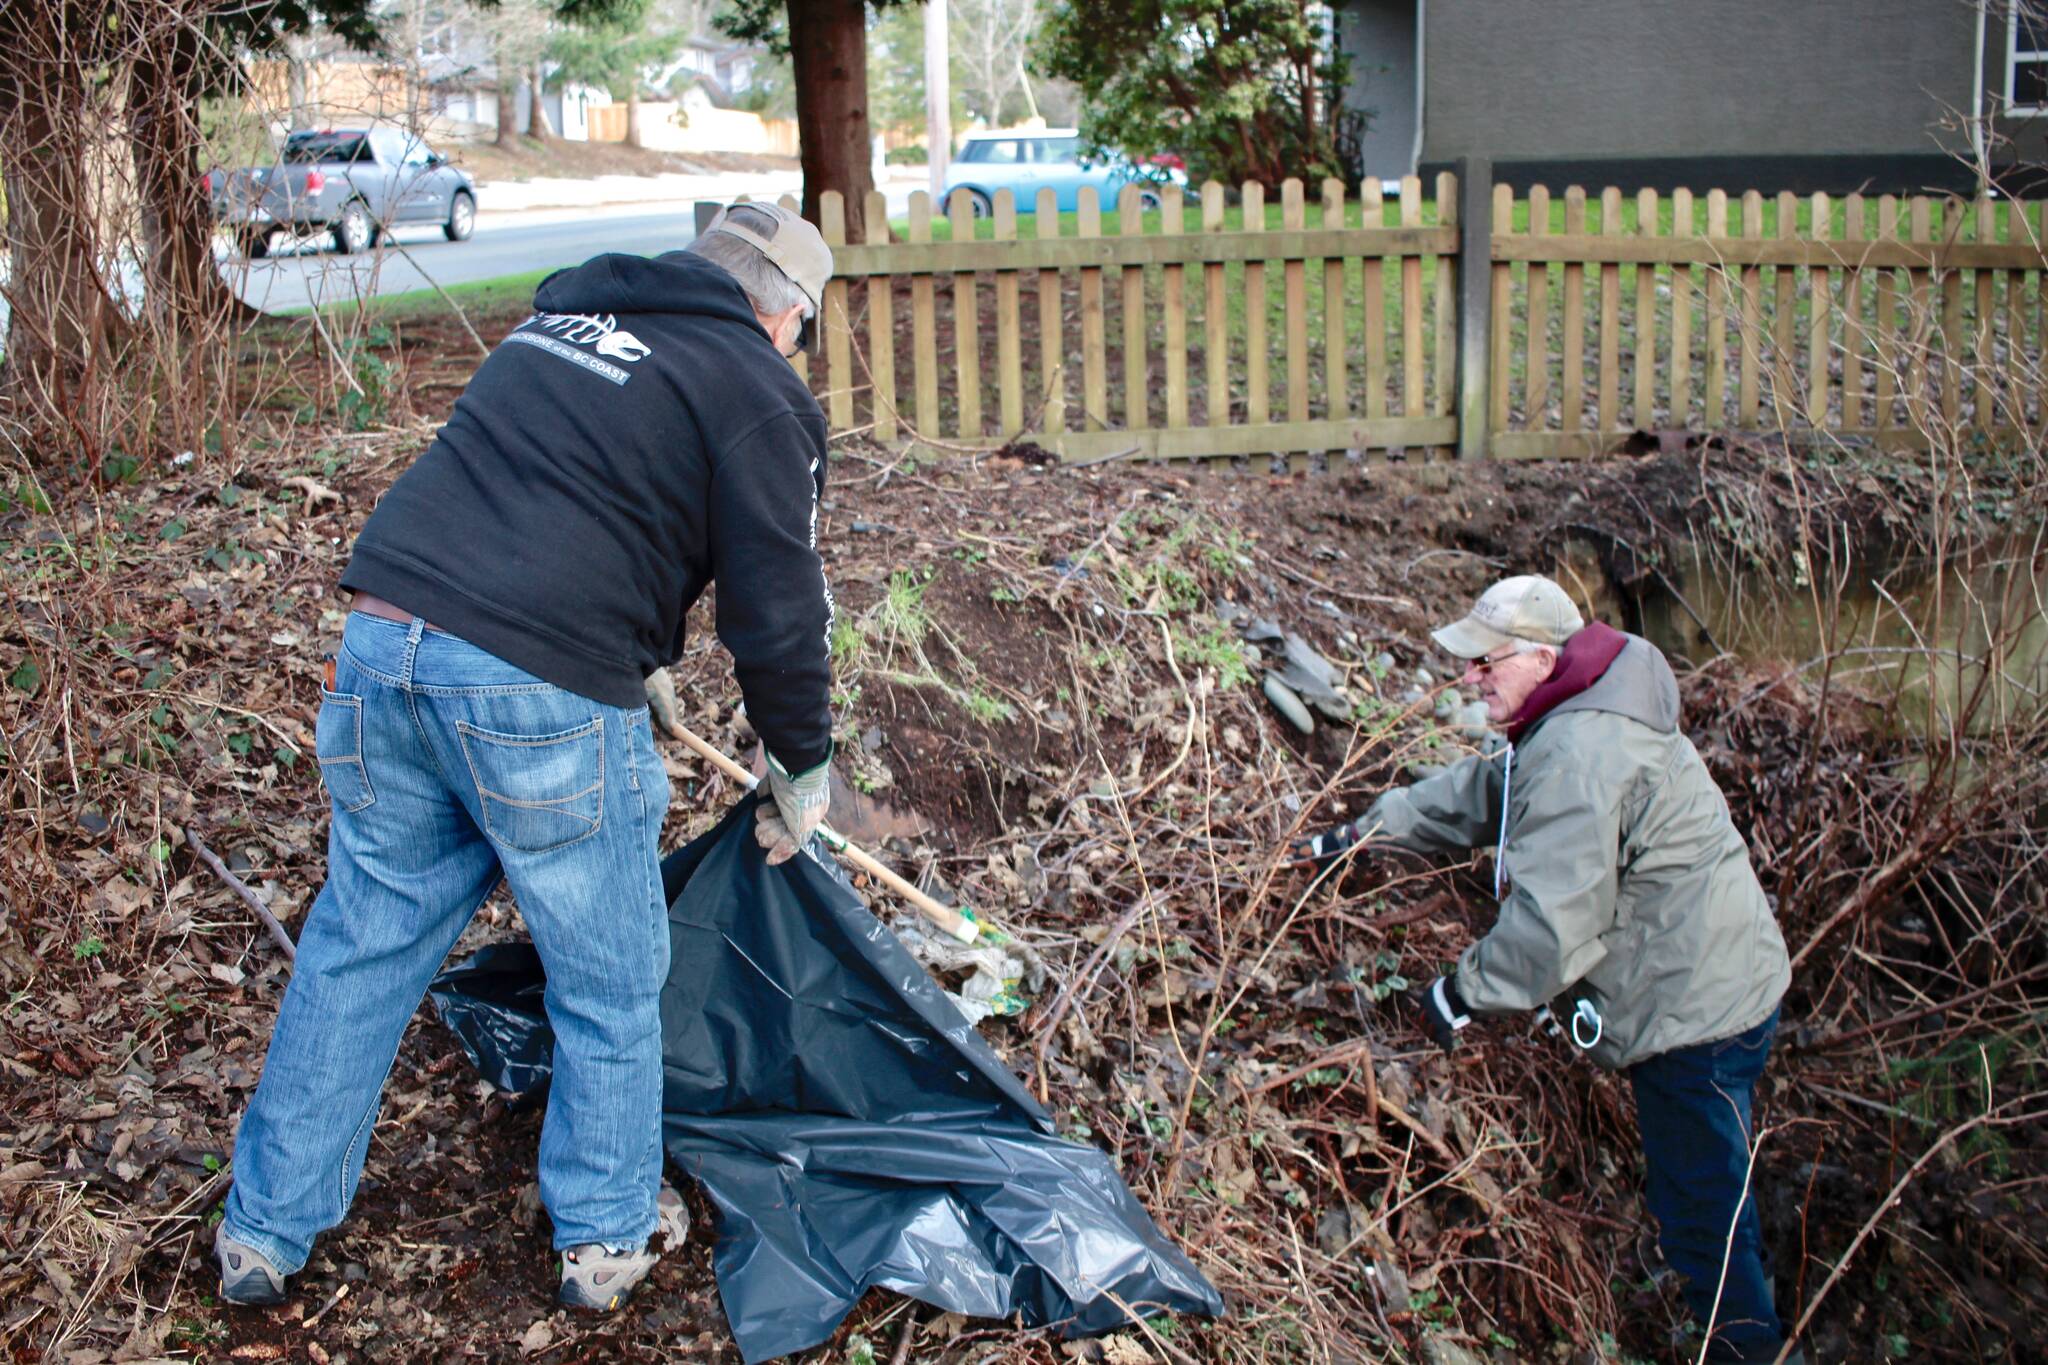 28020154_web1_220201-CRM-Streamkeepers-Bears-CLEANUP_7